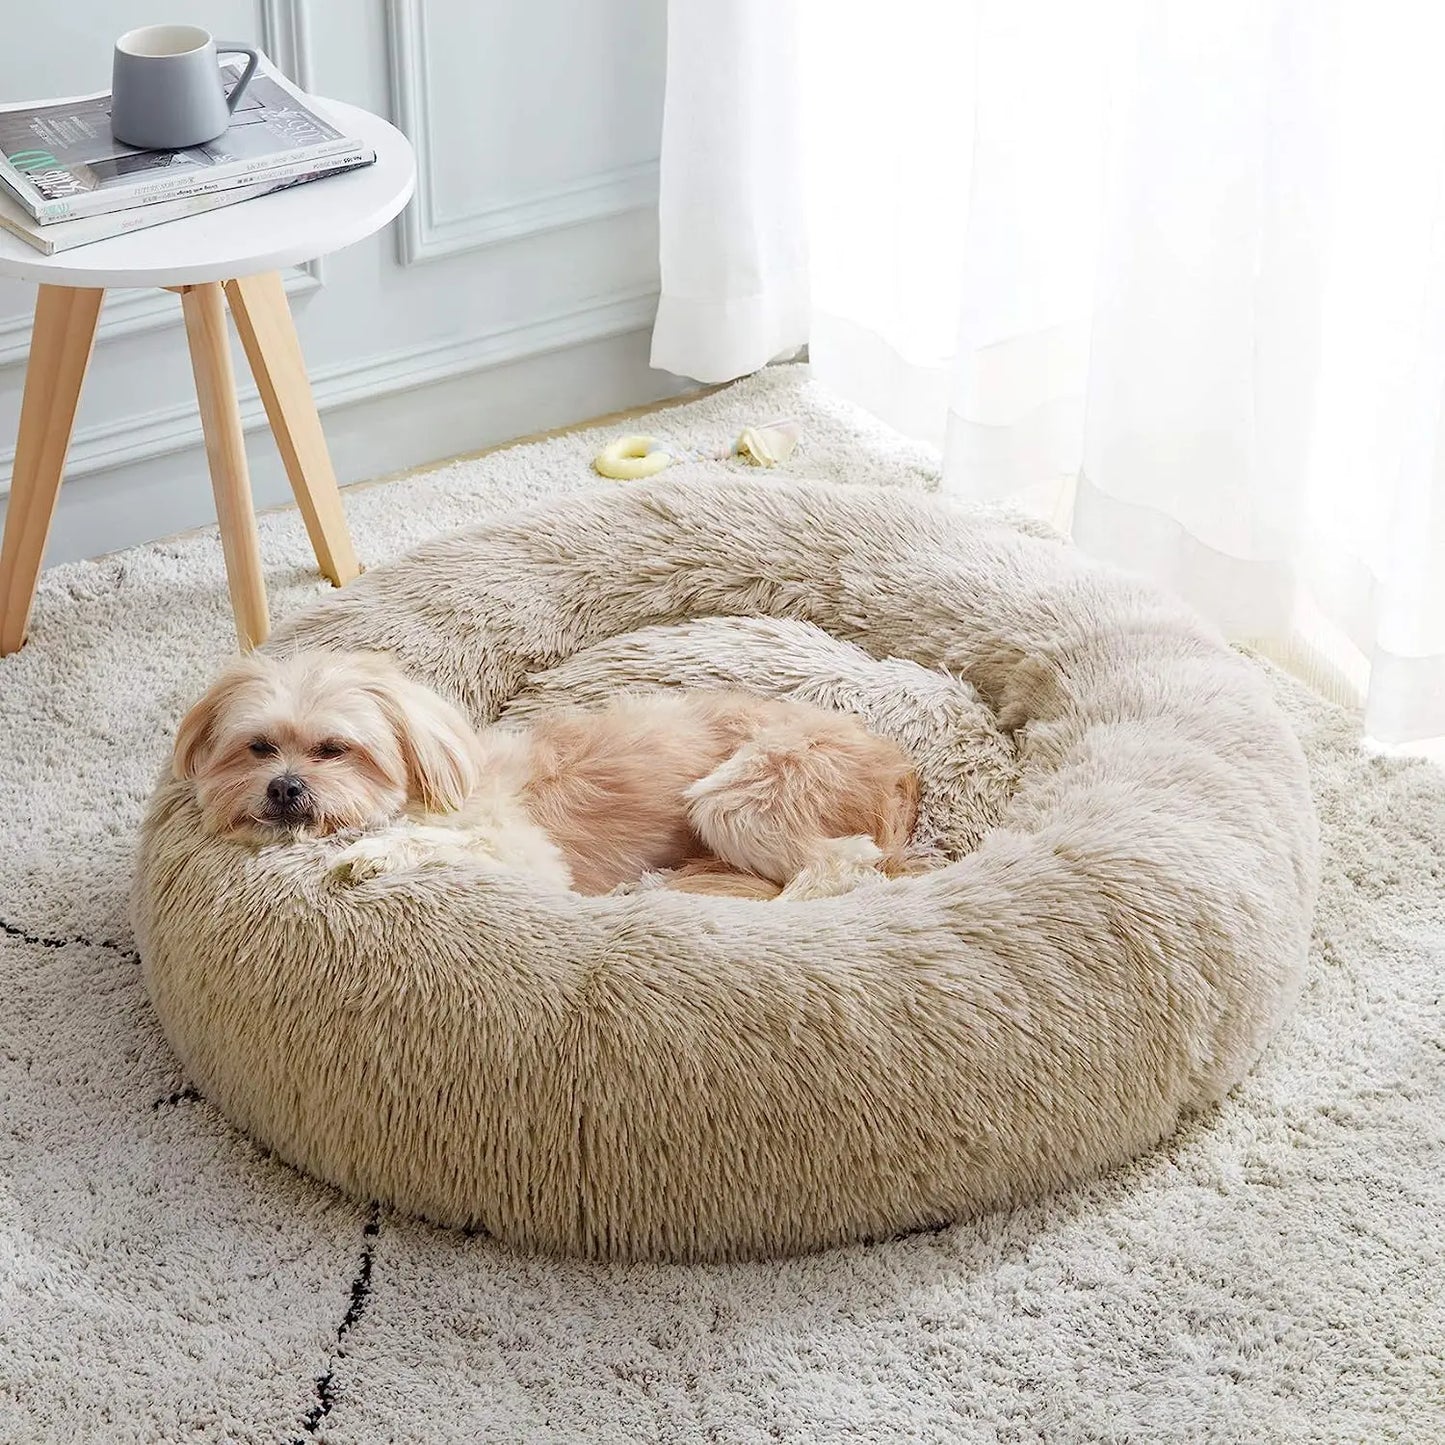 Puppy enjoying a nap in a Steven Store™ Cat Bed with Long Plush